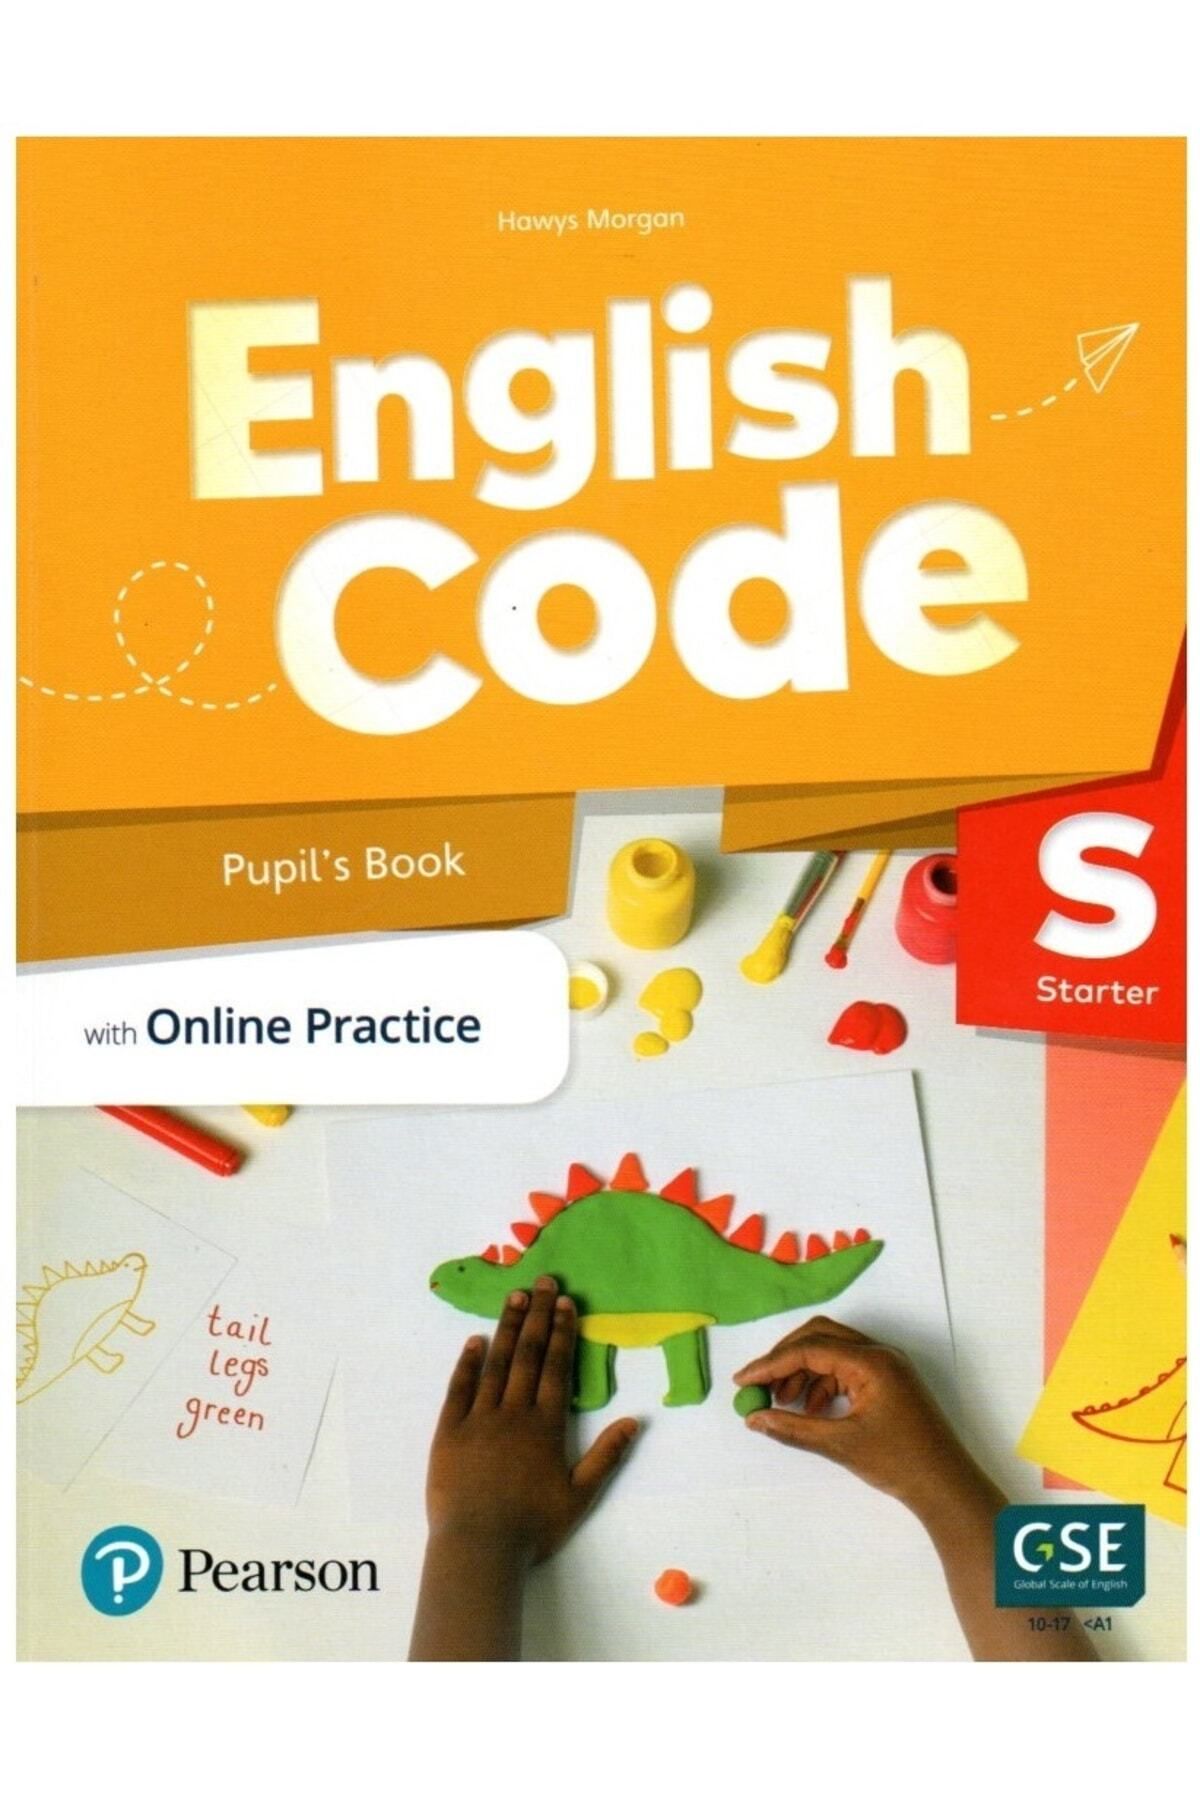 Pearson English Code Starter Pupils Book With Online Practice